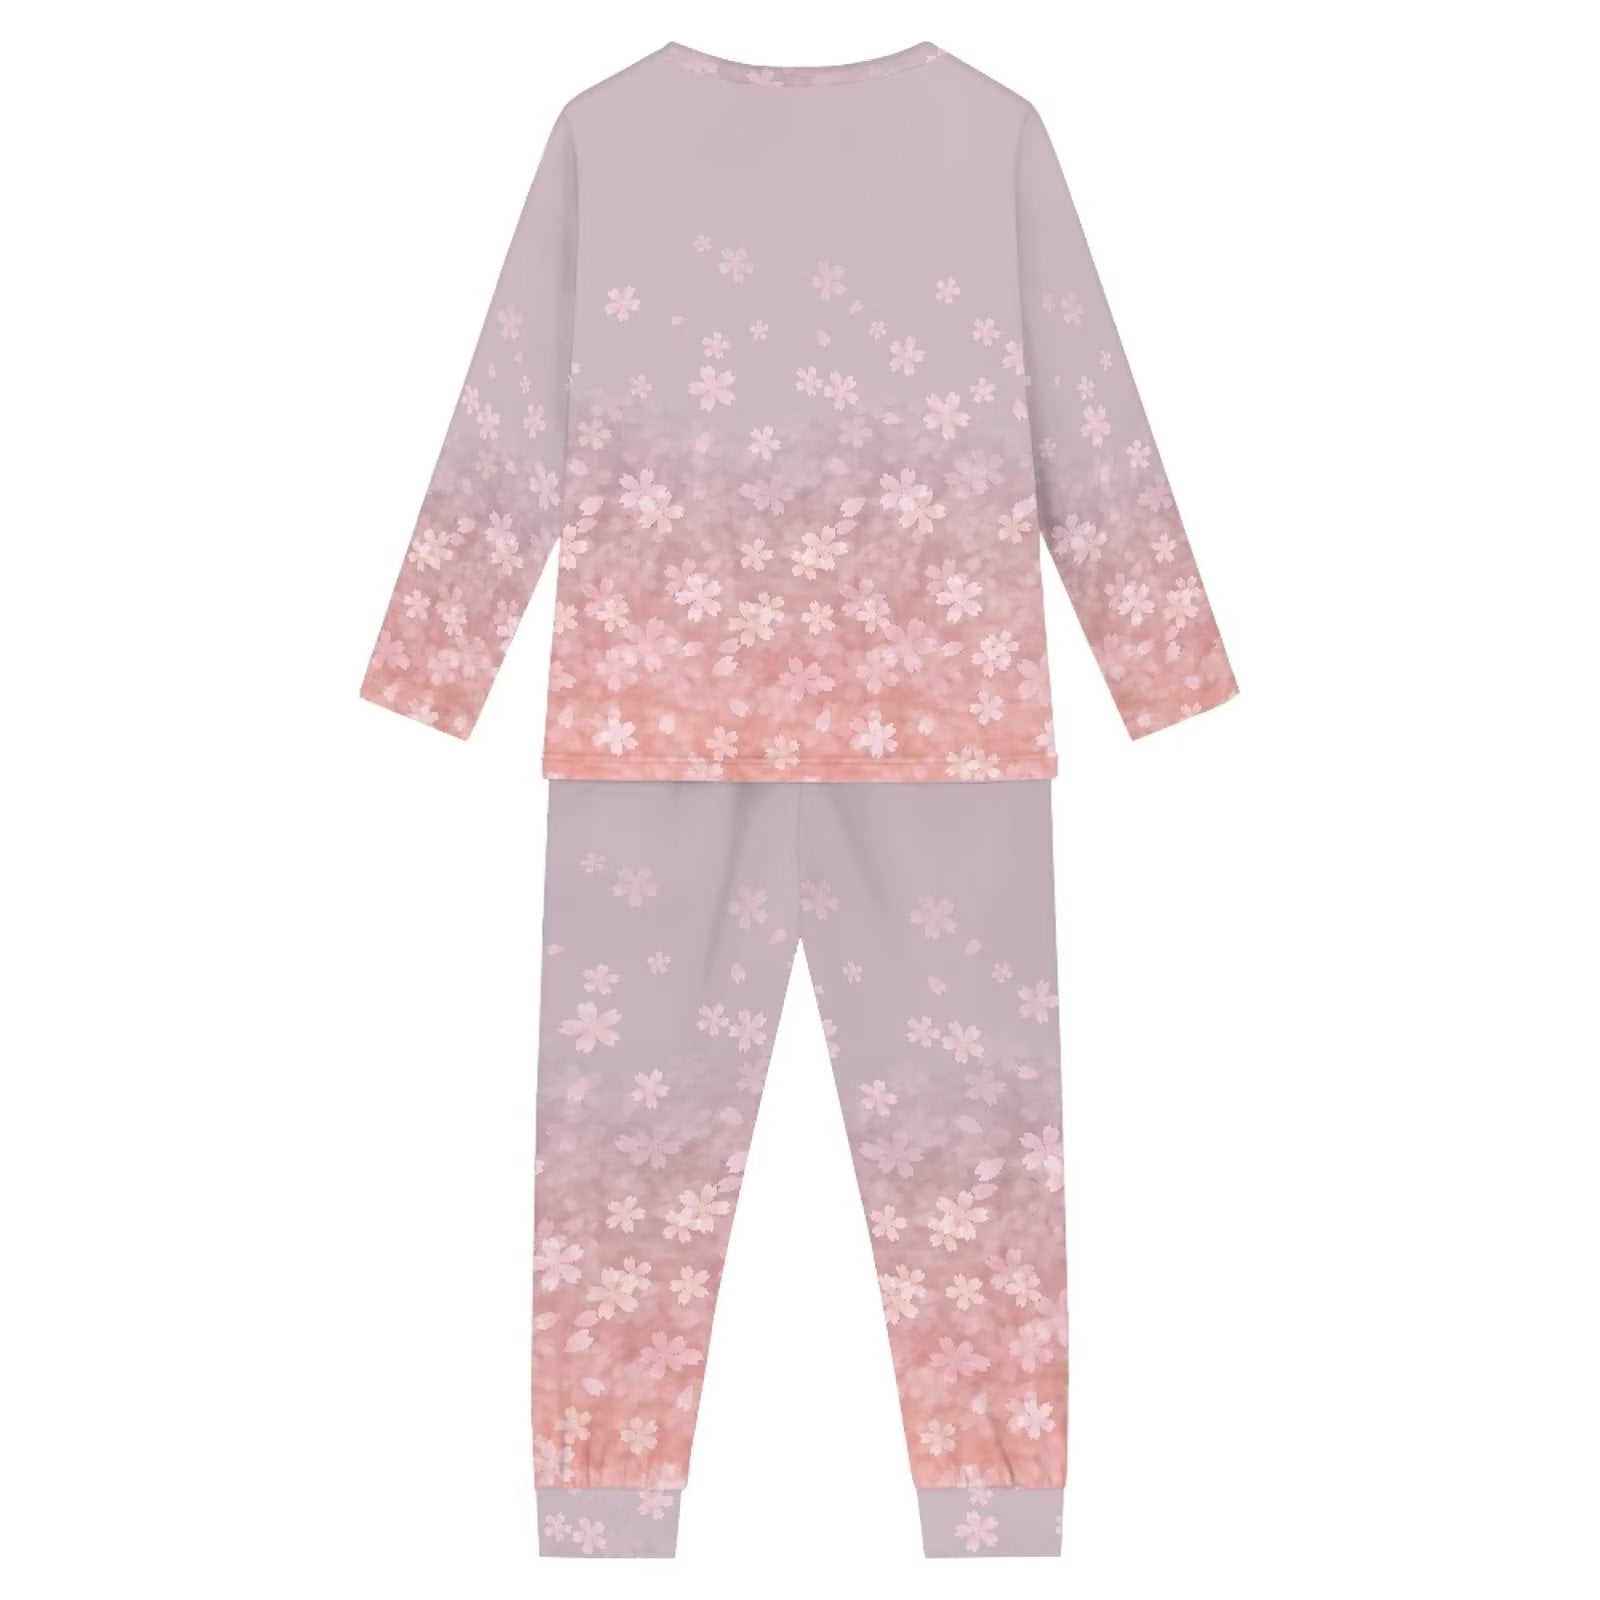 Renewold Kids Durable Pajamas Set 2 Pieces Cherry Blossom Axolotl Pjs Top  Blue Pink Lounge Wear Thermal Scoop Neck Sleepwear Athletic Clothing Size  7-8 